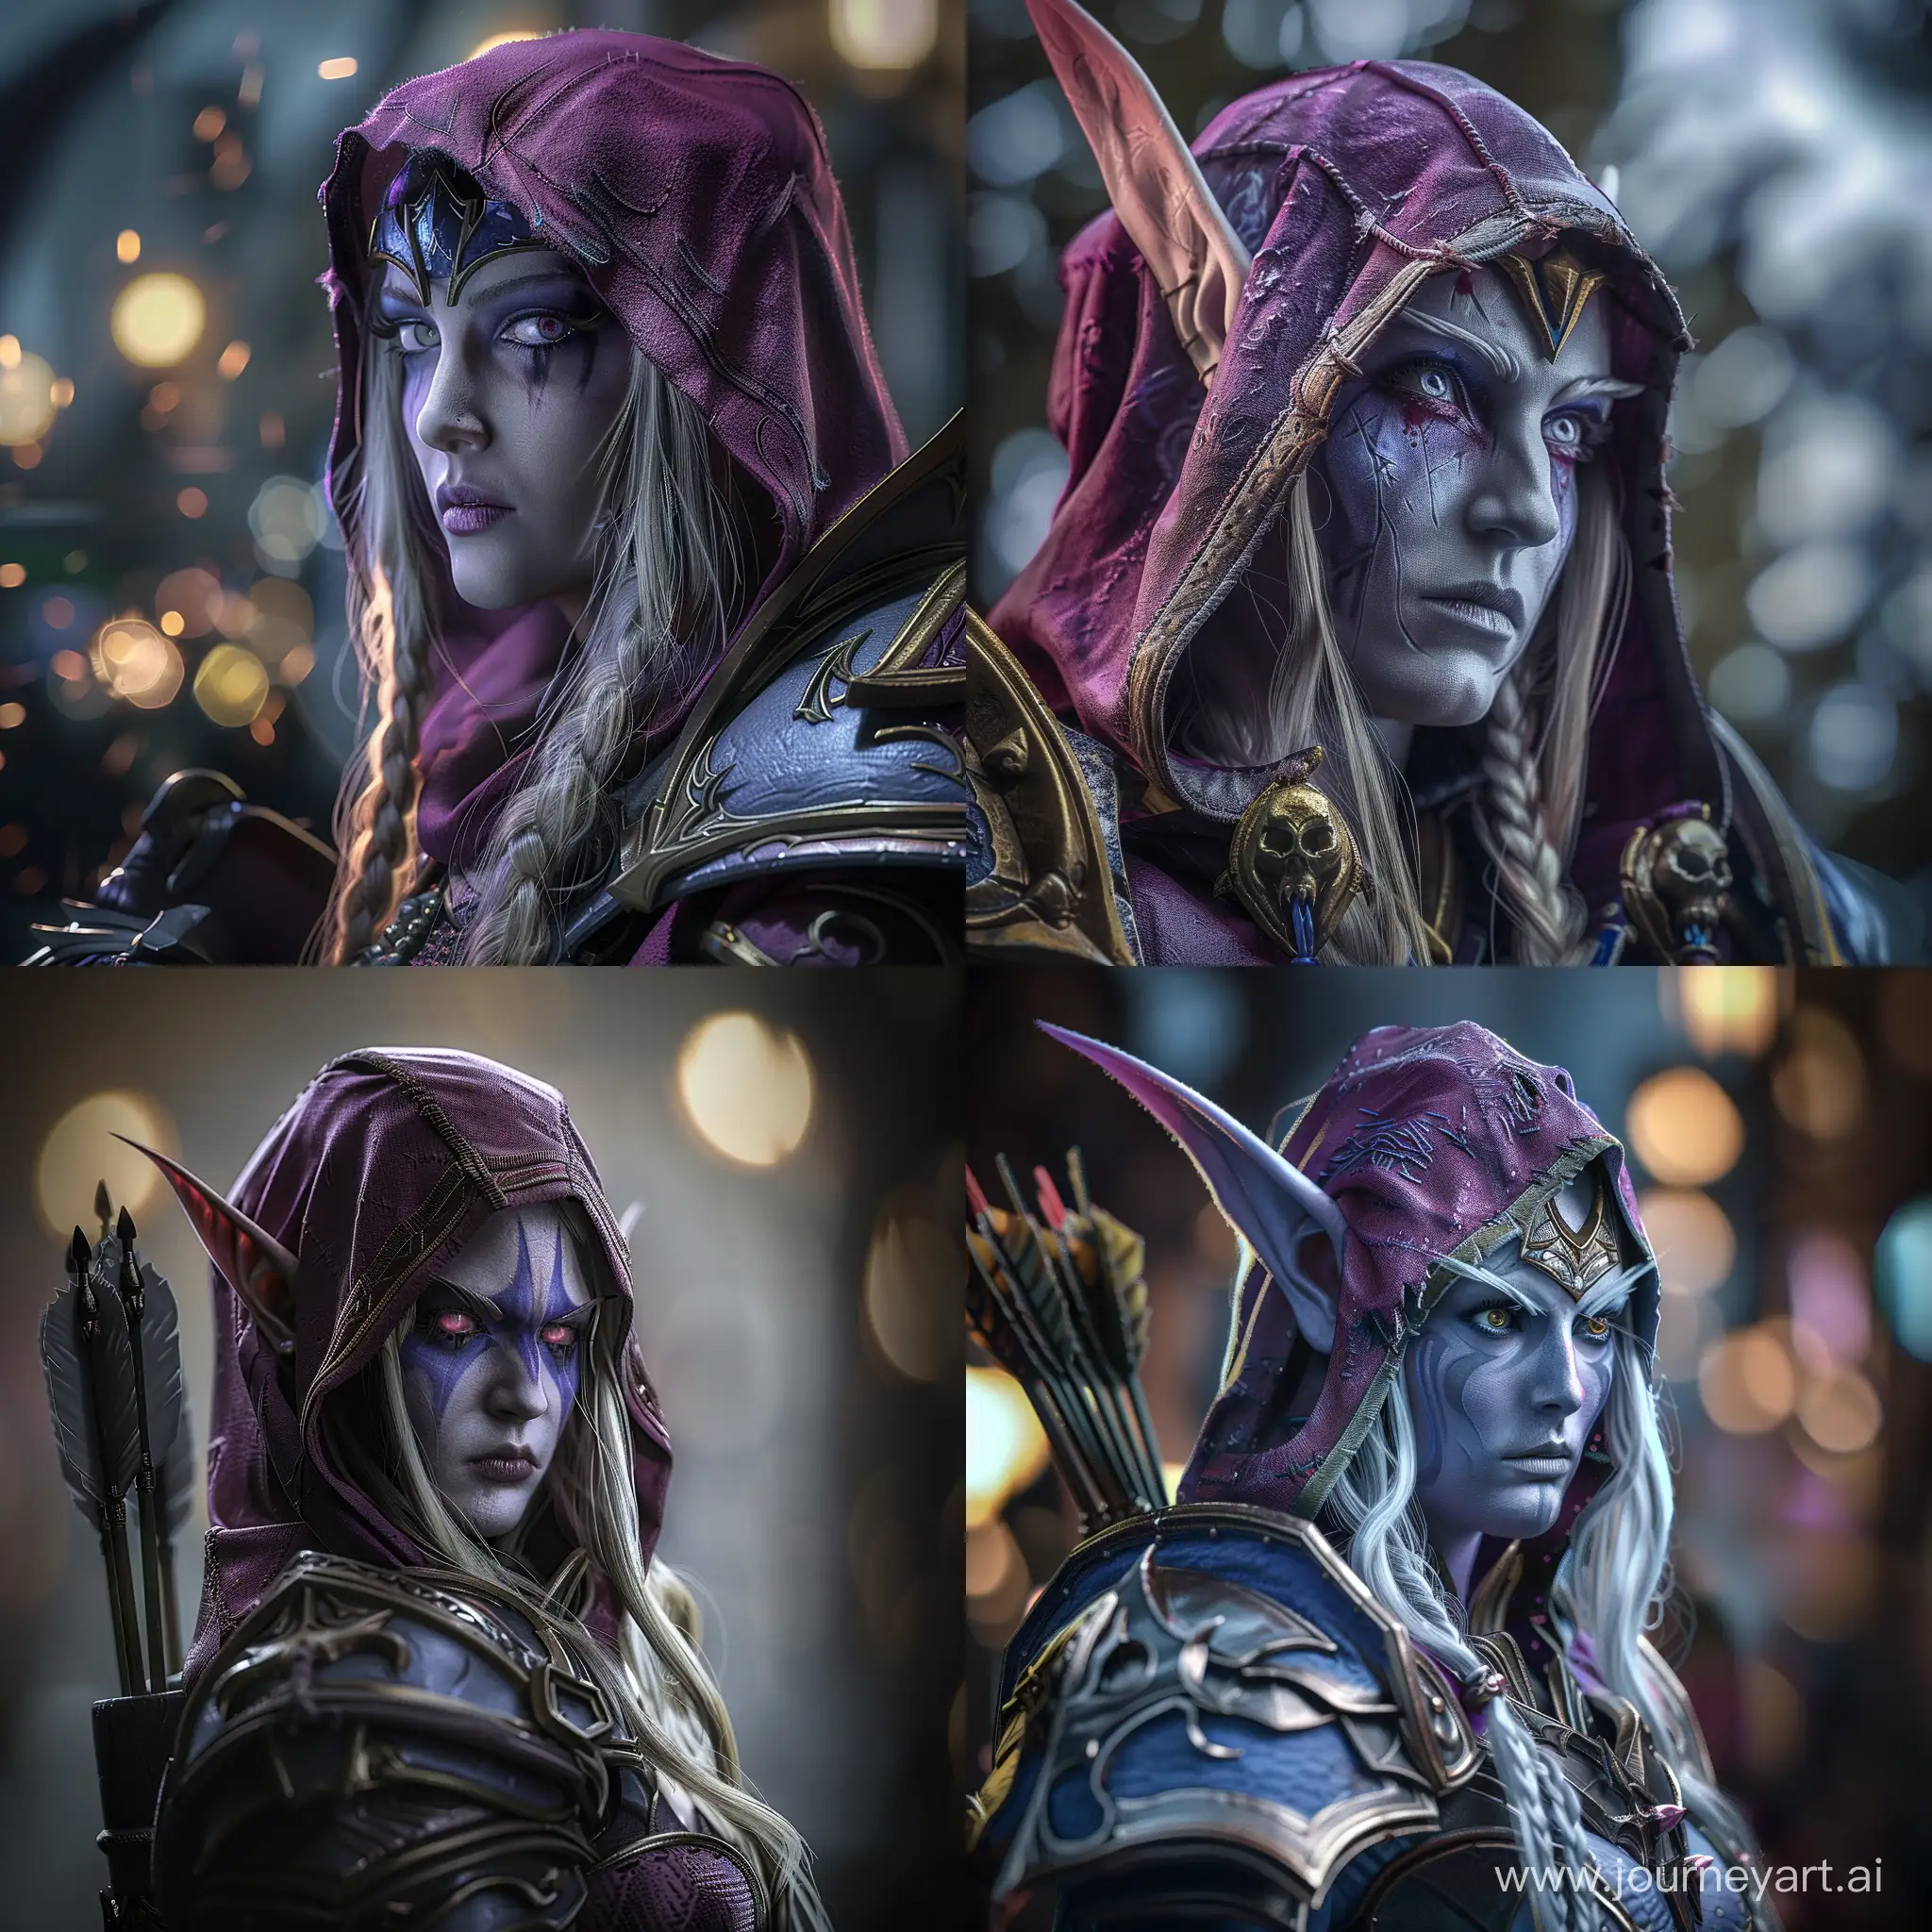 world of warcraft Sylvanas Windrunner character, ultra realistic, hyber detailed, modelcore, portrait photo. use sony a7 II camera with an 30mm lens fat F.1.2 aperture setting to blur the background and isolate the subject. use distinctive lighting on the subjects shot. The image should be shot in ultra-high resolution. --v 6